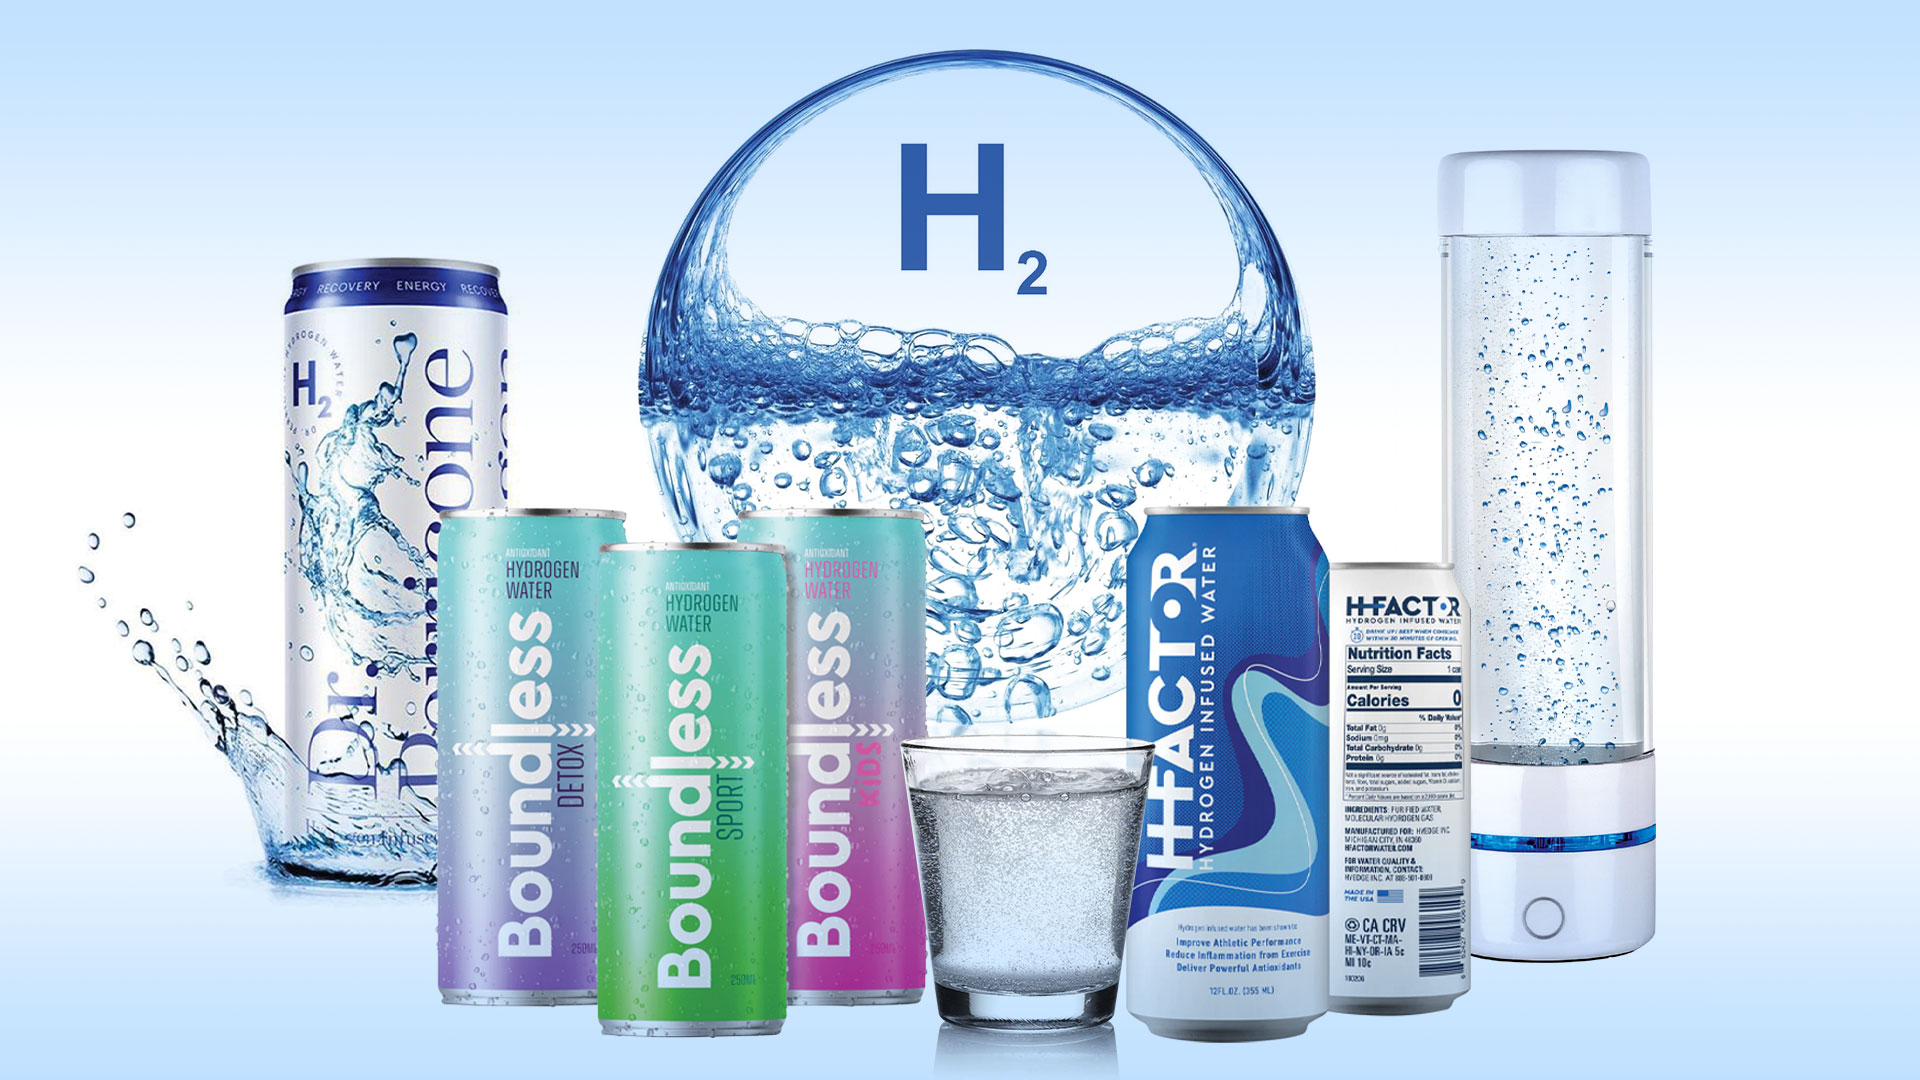 Healing Hydrogen: A profusion of health benefits may arise from sipping water infused with H2